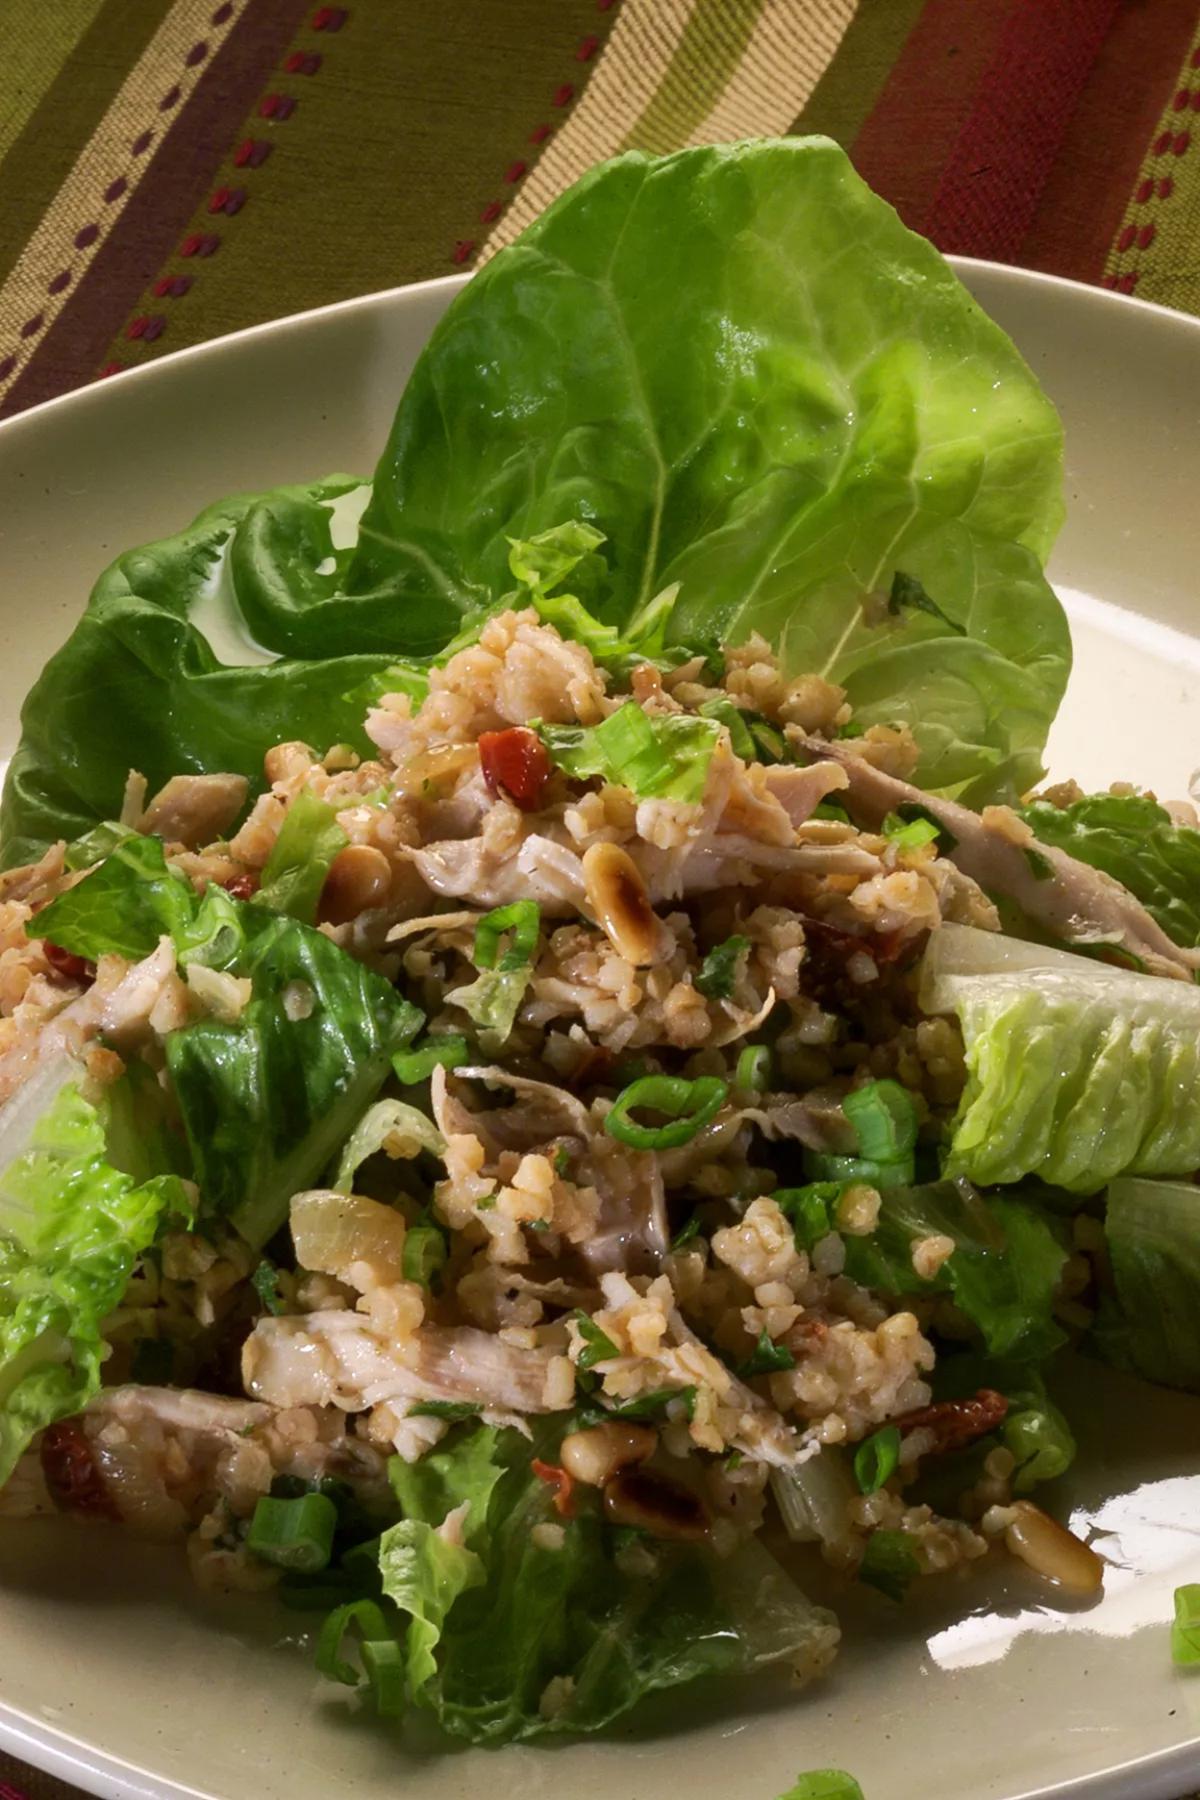 Chicken Tabbouleh Salad. (Anacleto Rapping/Los Angeles Times/TNS)